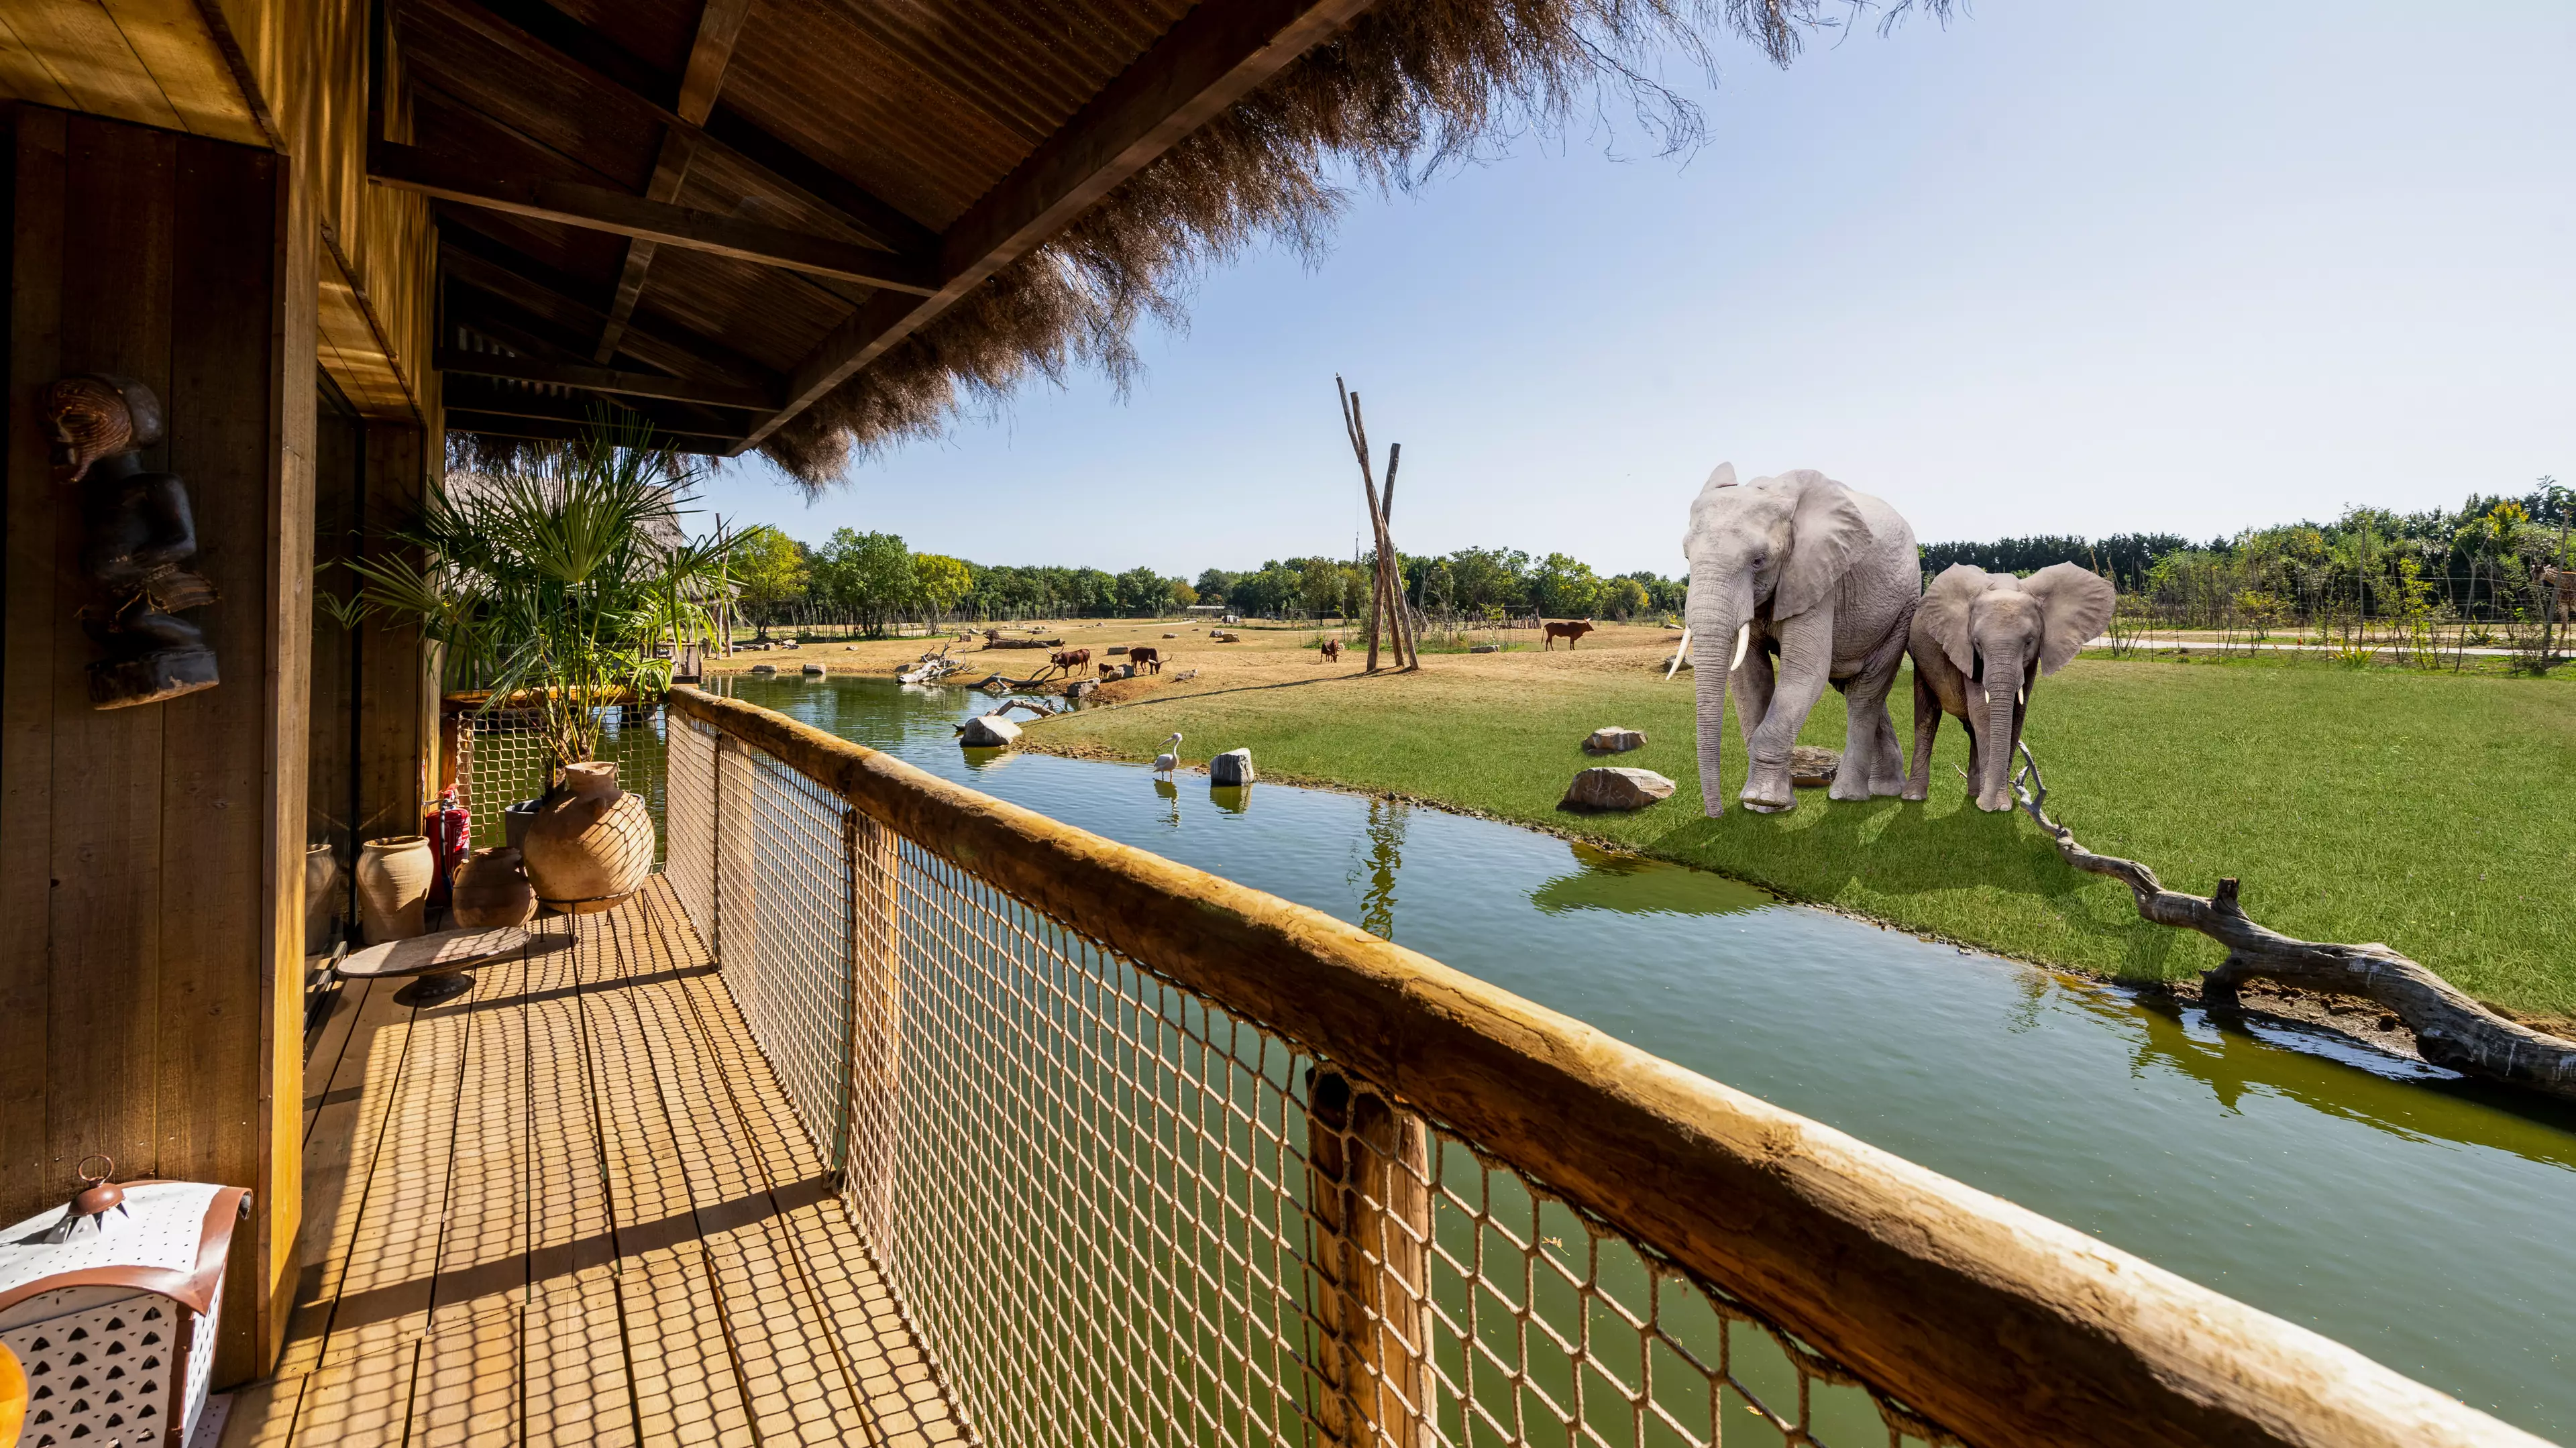 Luxury UK Safari Park Lodges Offering Stays With Elephants And Cheetahs 